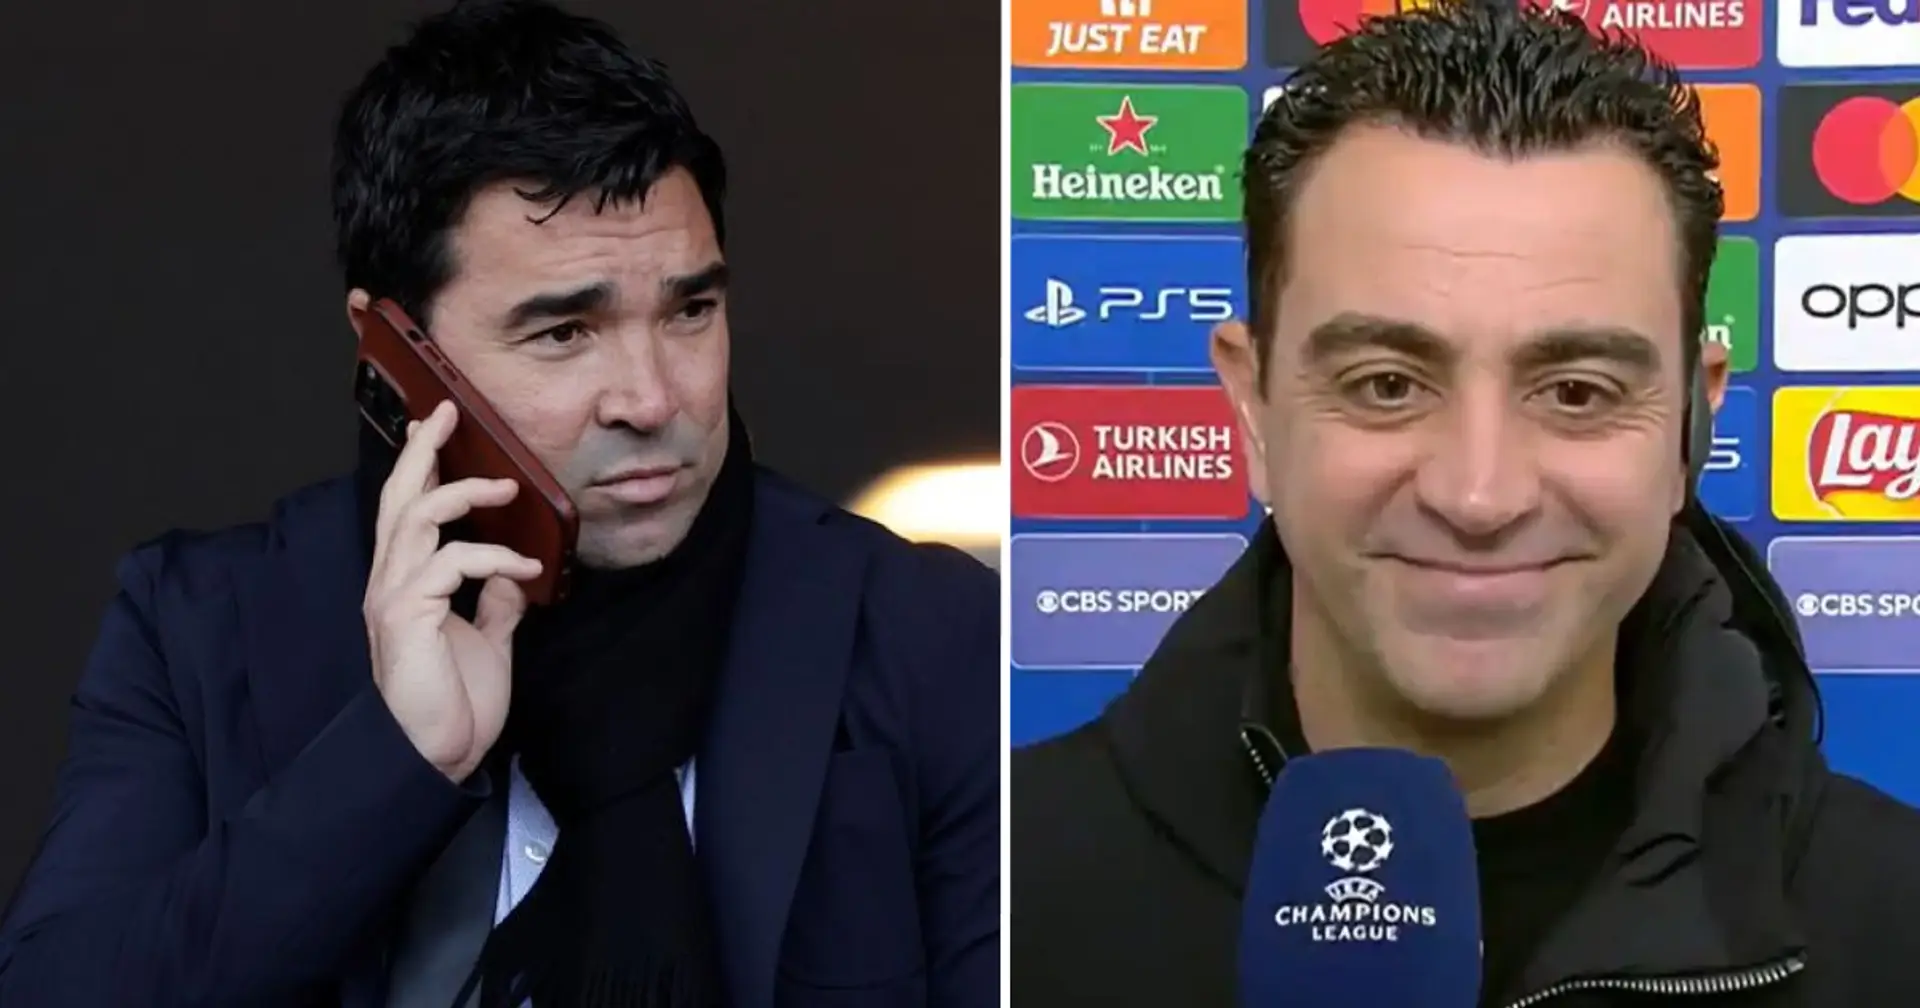 Agent of experienced midfielder confirms talks with Deco – Xavi urged him to join Barca 